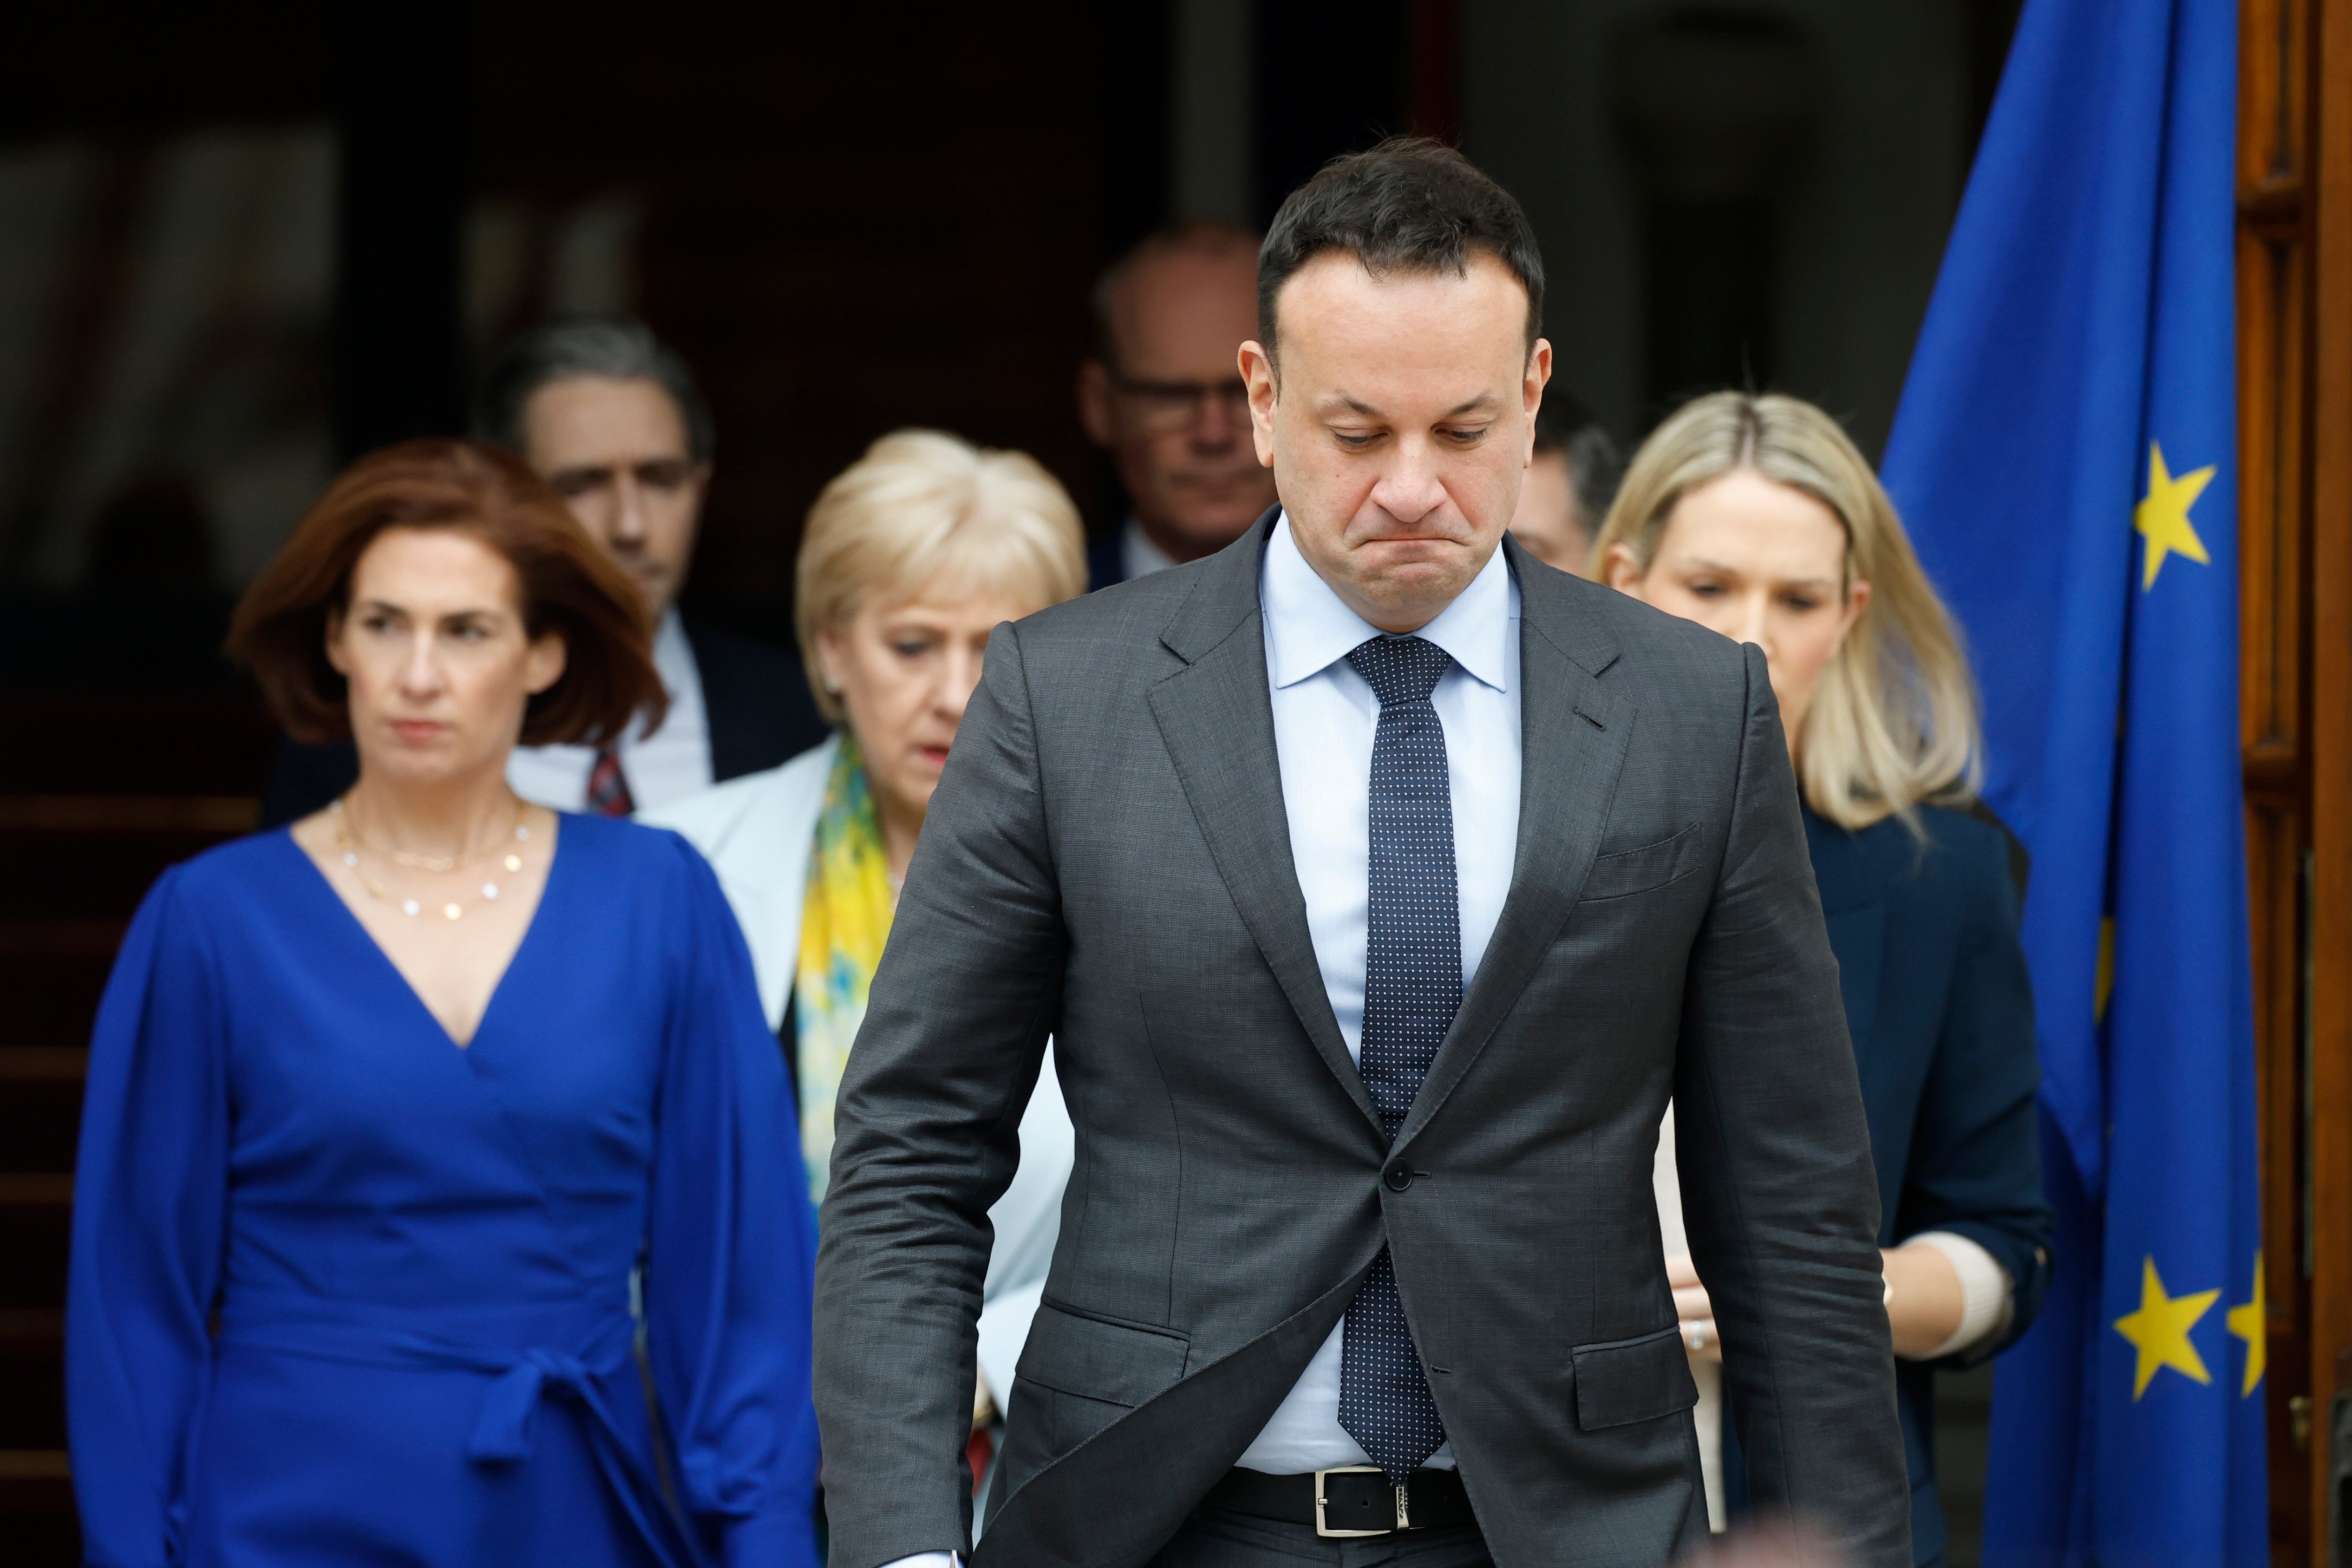 Yesterday Leo Varadkar announced he is to step down as taoiseach and as leader of his party, Fine Gael